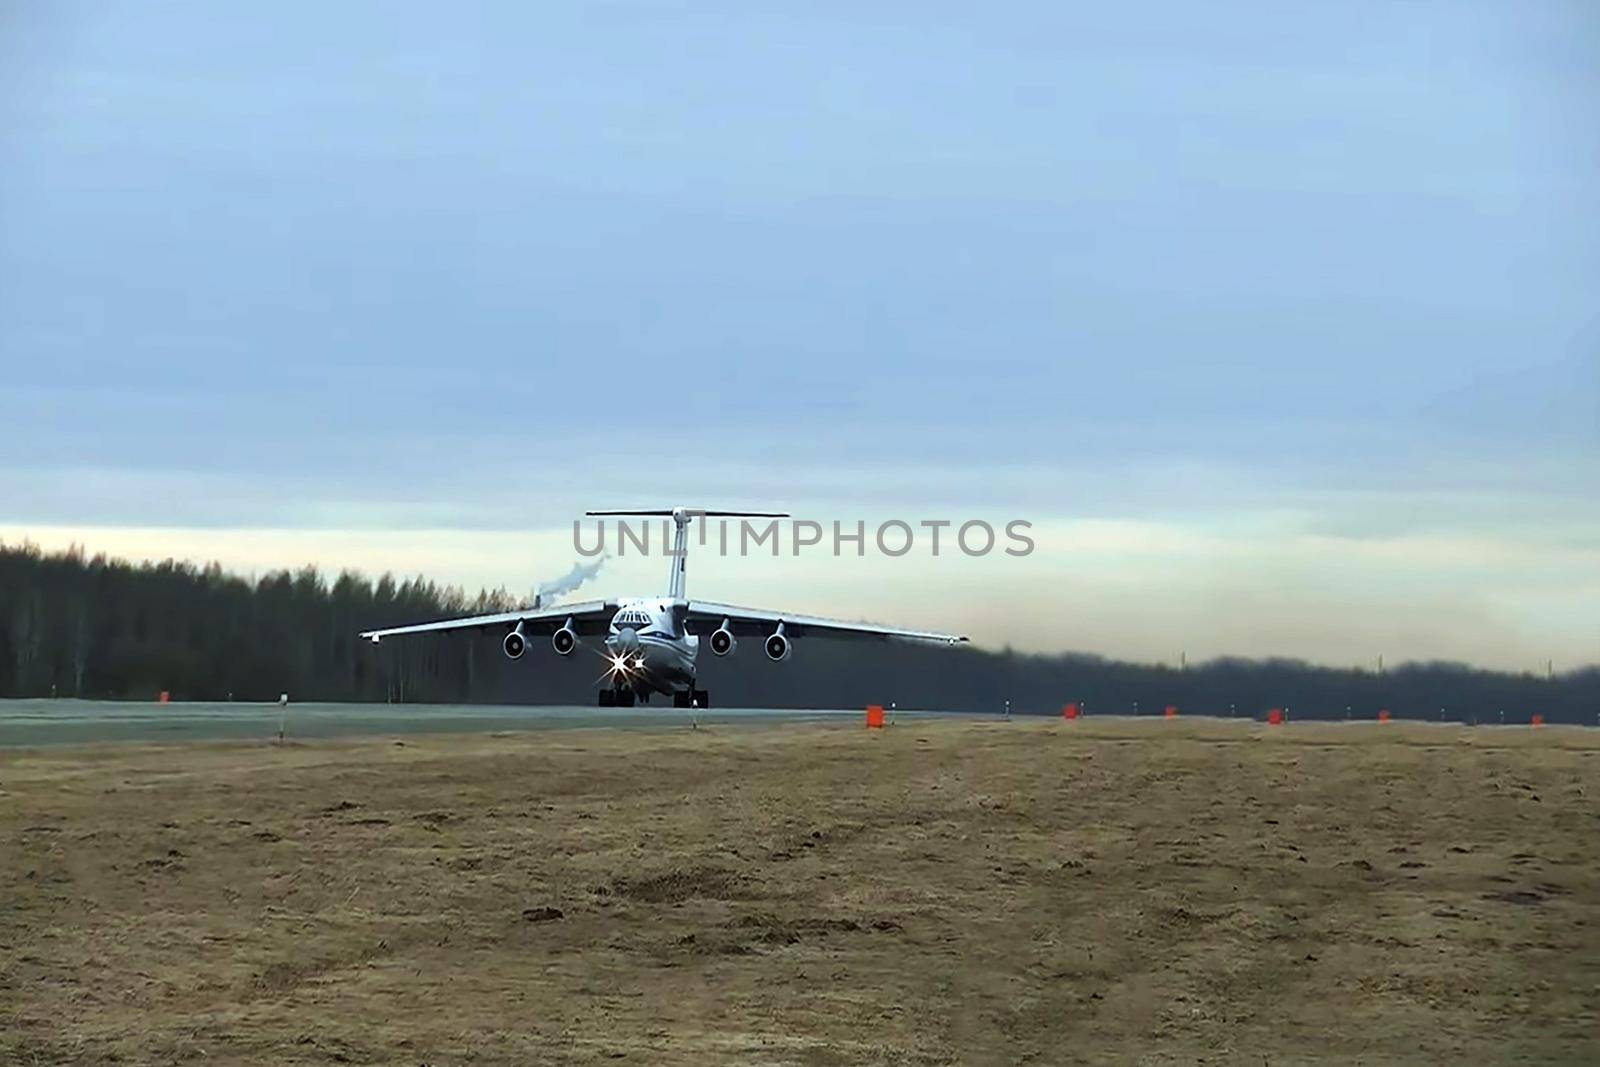 Large cargo plane on runway. Airport. Russia - 05.06.2021 by Essffes